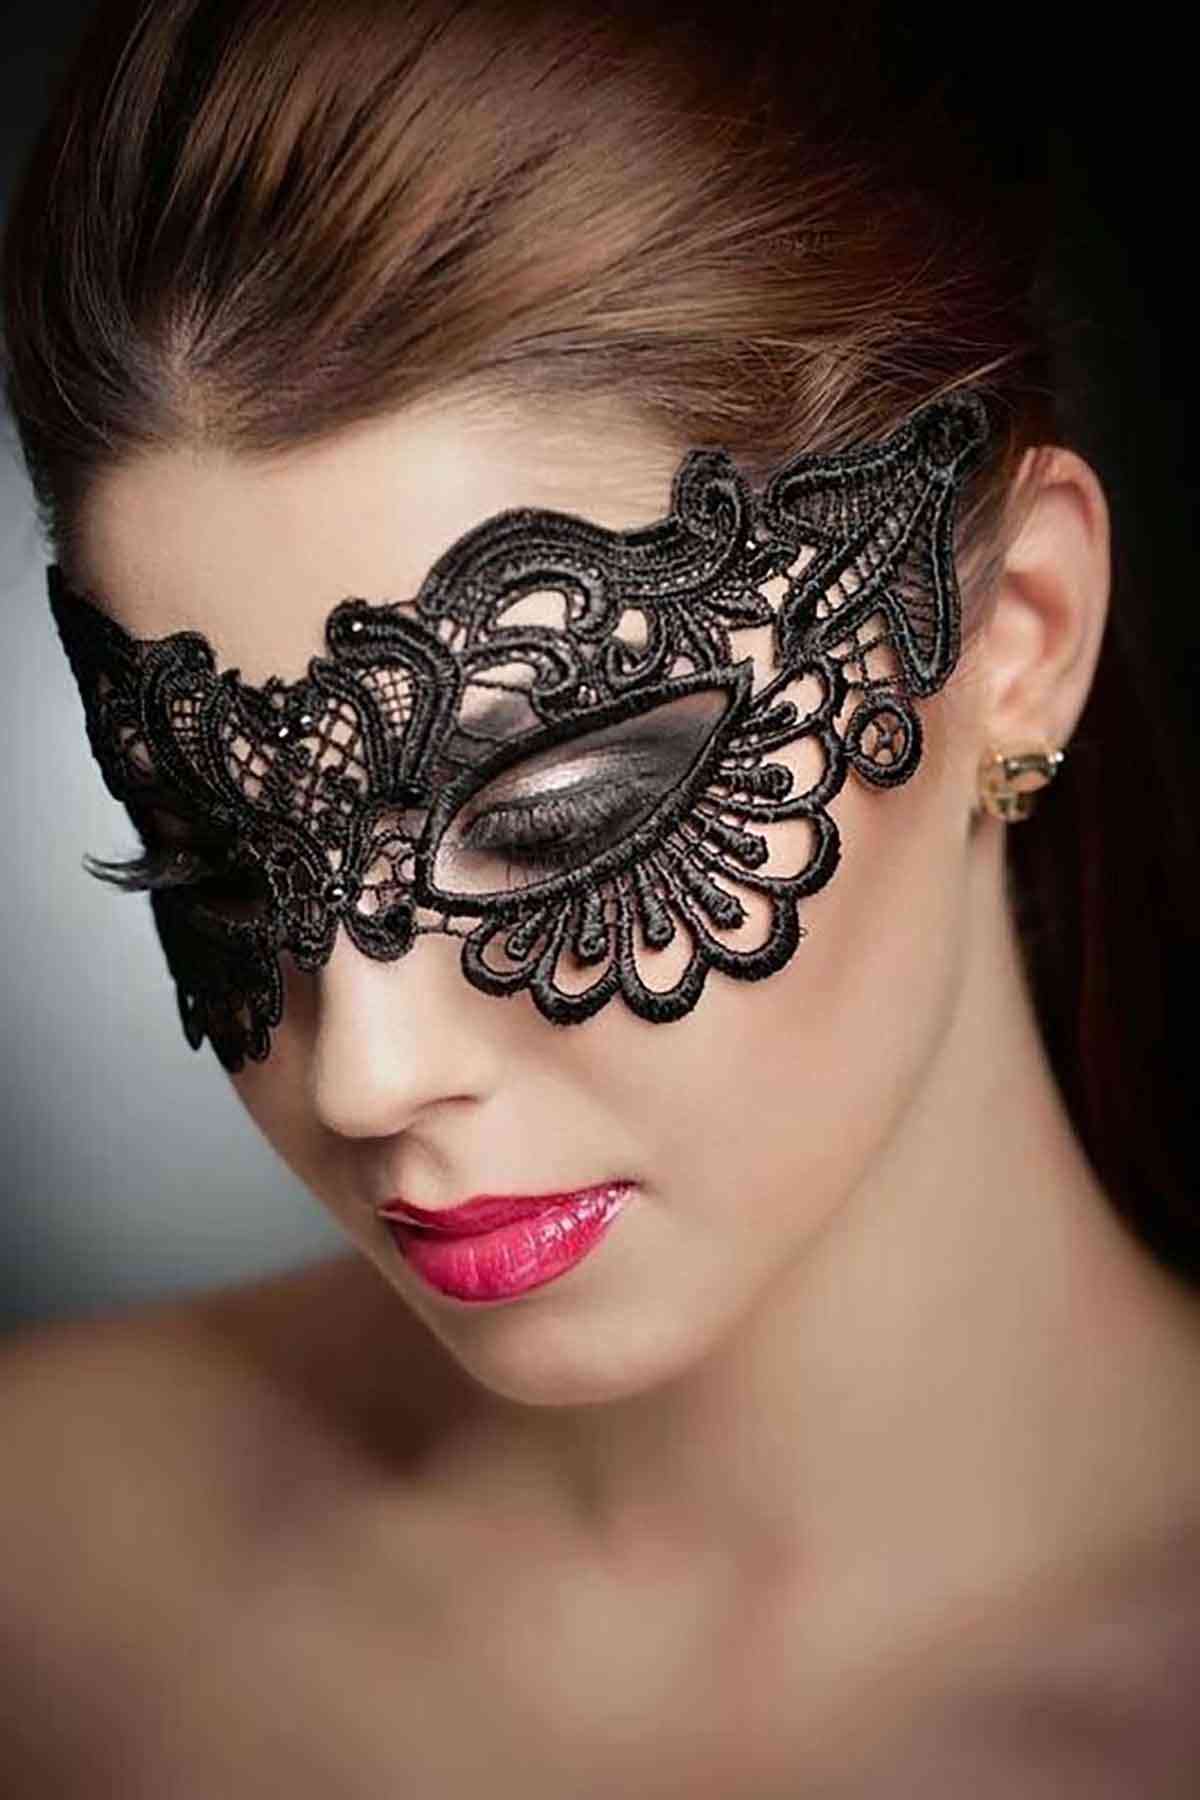 Black Lace Eye Mask Exotic Apparel Sexy Lingerie Erotic Lingerie Exotic Accessories Sex Toys